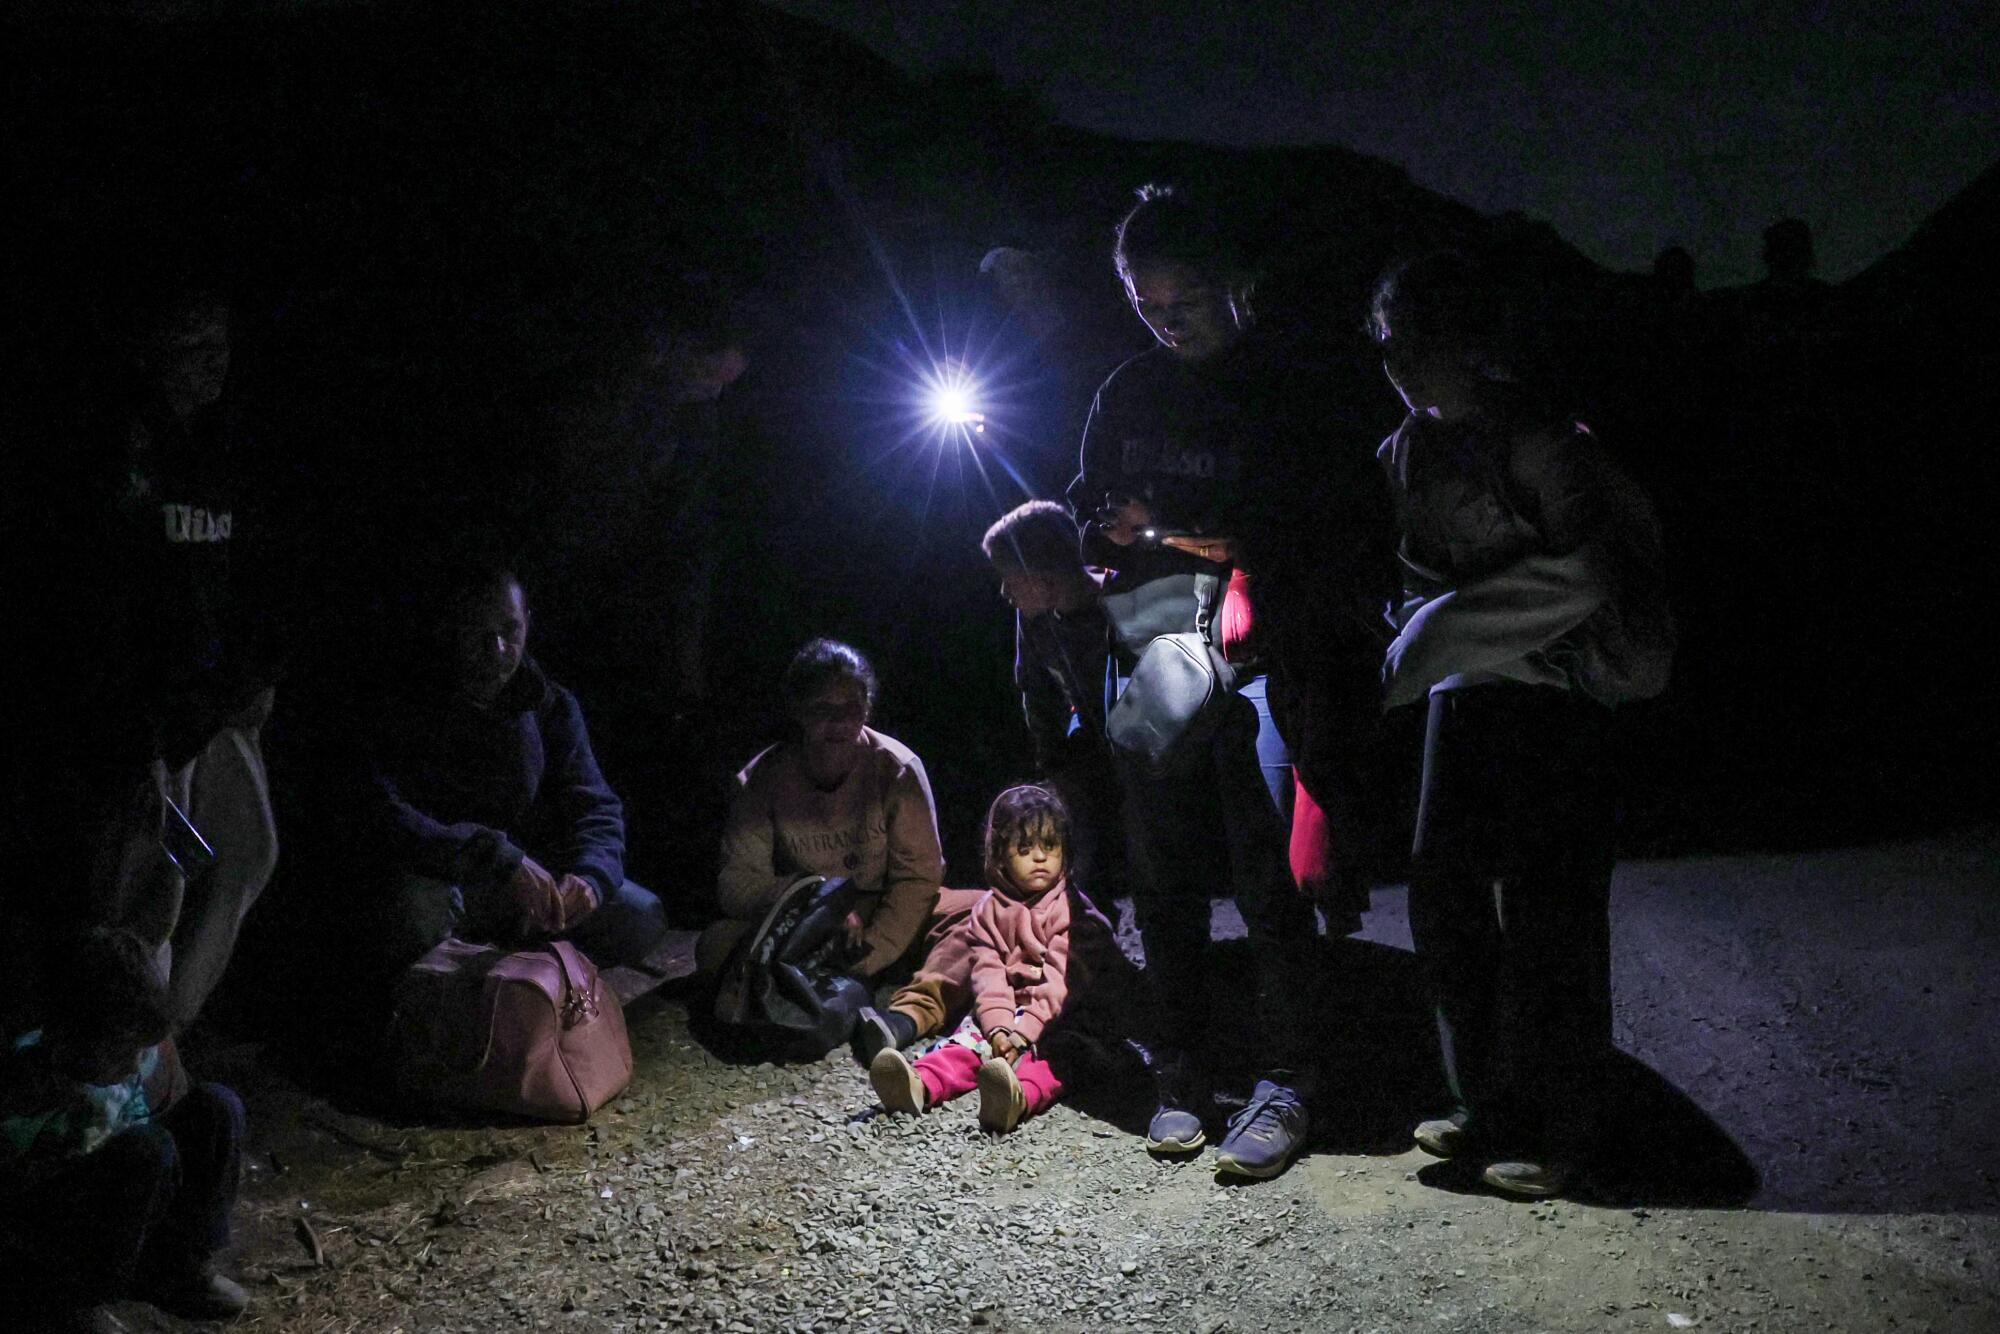 Adults and children sit on the ground at night.